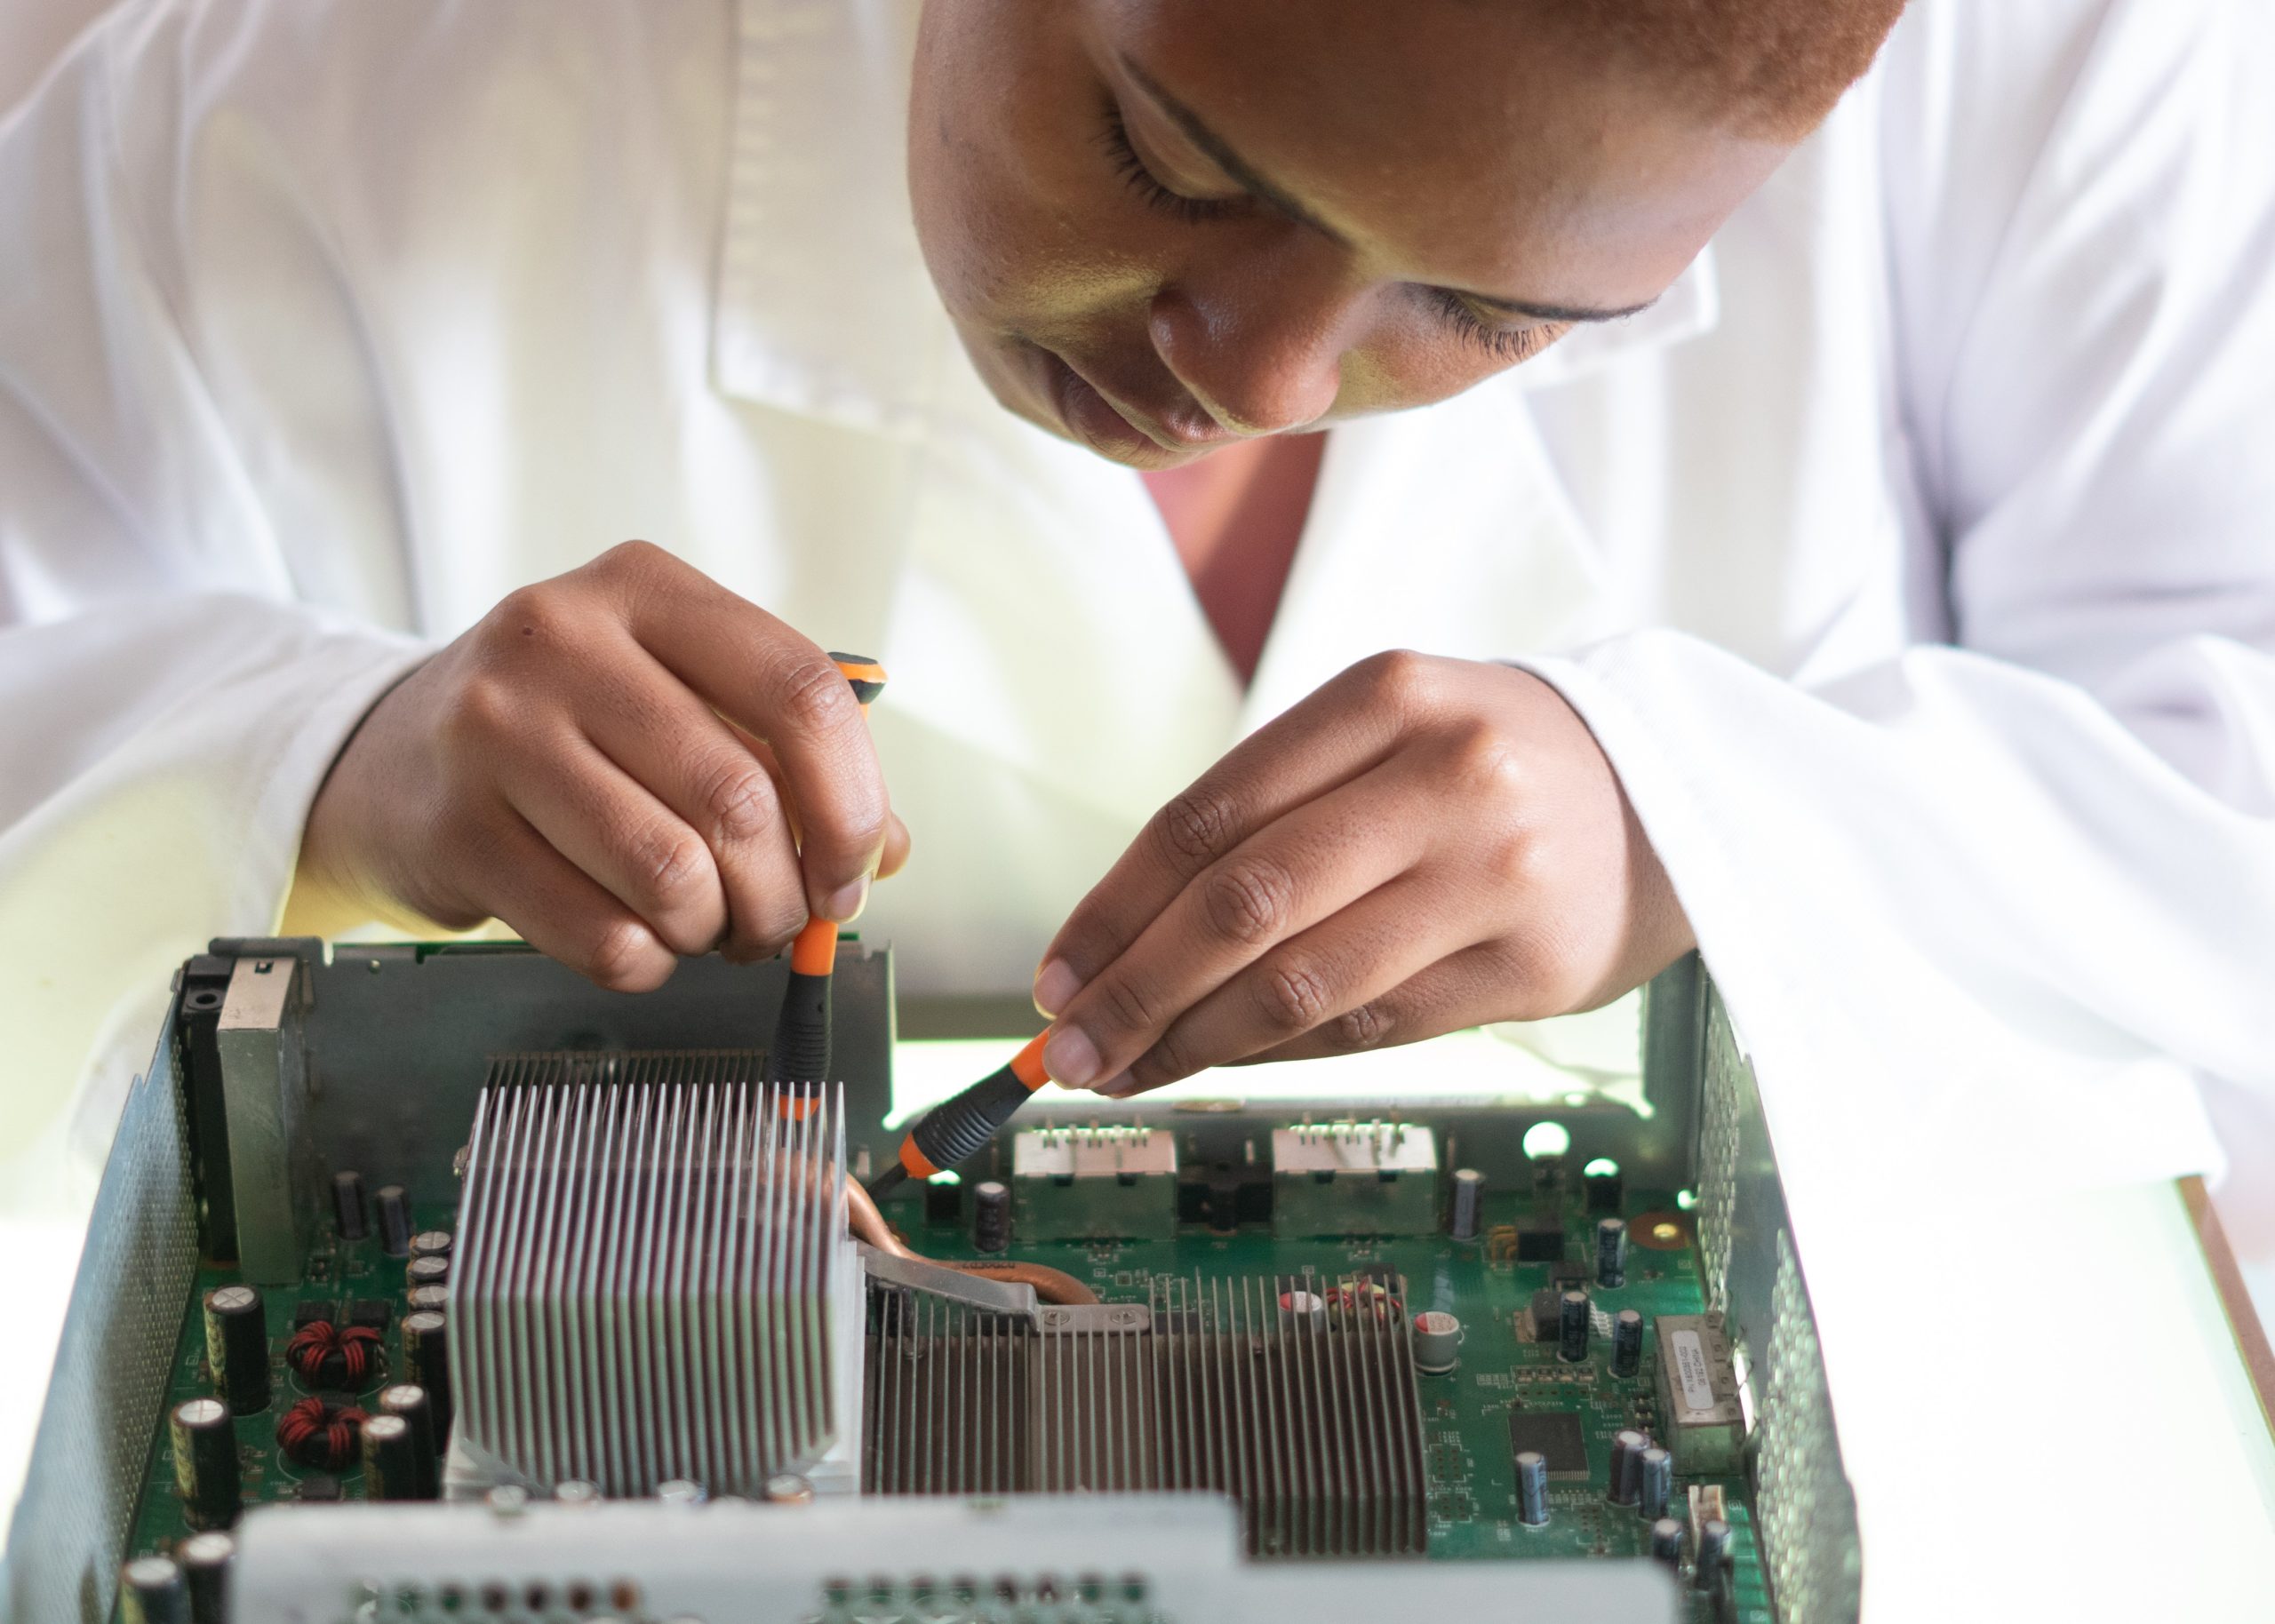 A female lab technician works on a piece of equipment.